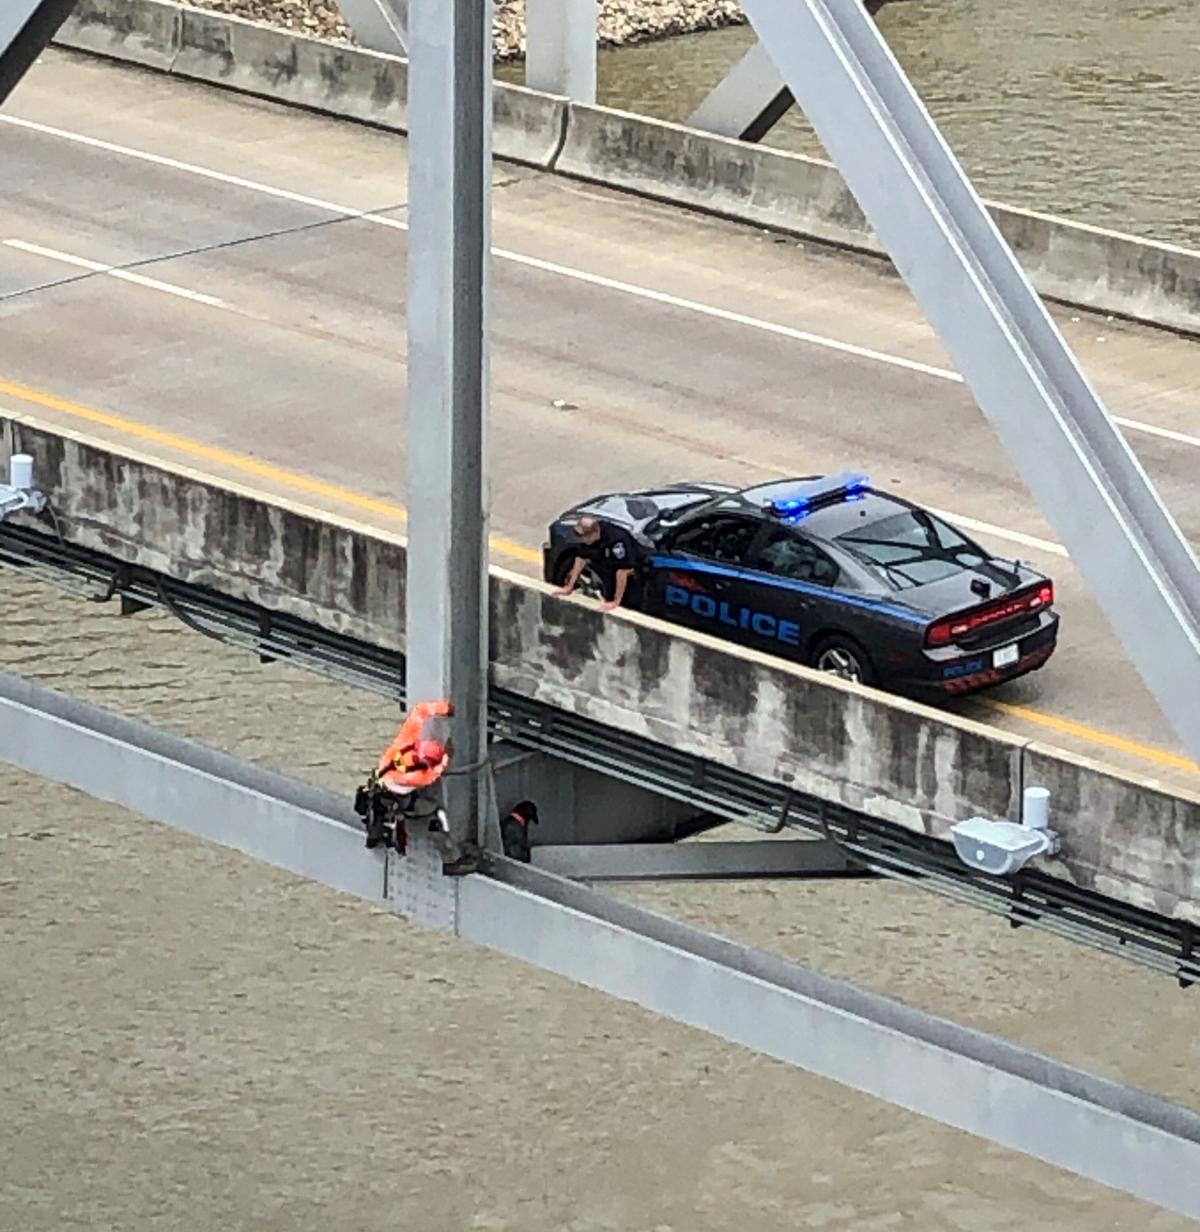 Ryan Nataluk, the vice president of Stantec, rescues the stranded dog from 120 feet above the Mississippi River. (Courtesy of Stantec)